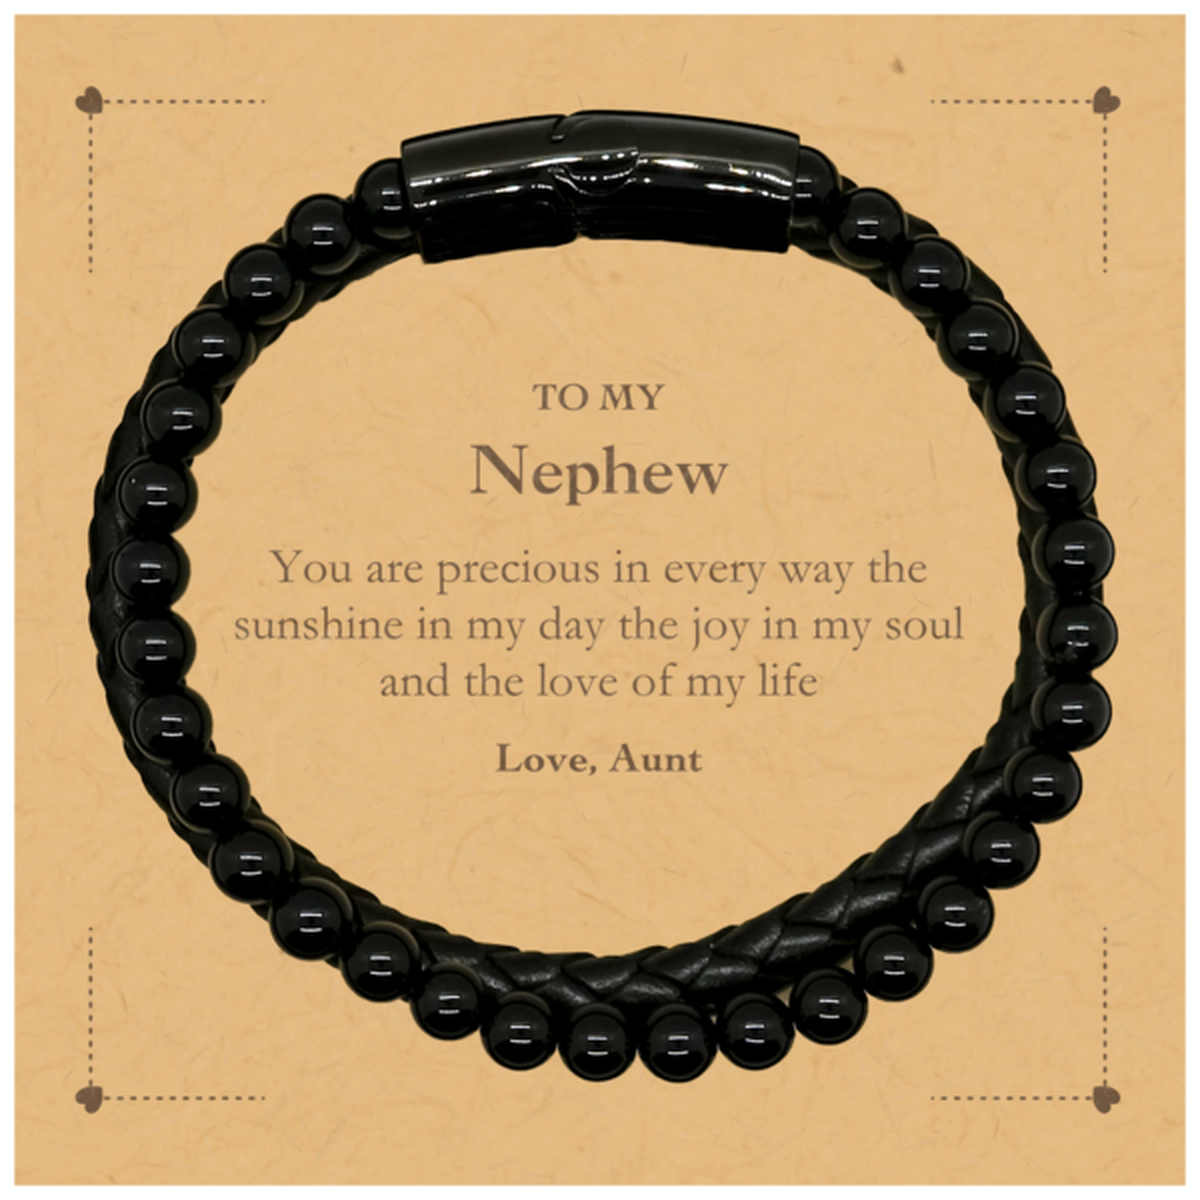 Graduation Gifts for Nephew Stone Leather Bracelets Present from Aunt, Christmas Nephew Birthday Gifts Nephew You are precious in every way the sunshine in my day. Love, Aunt